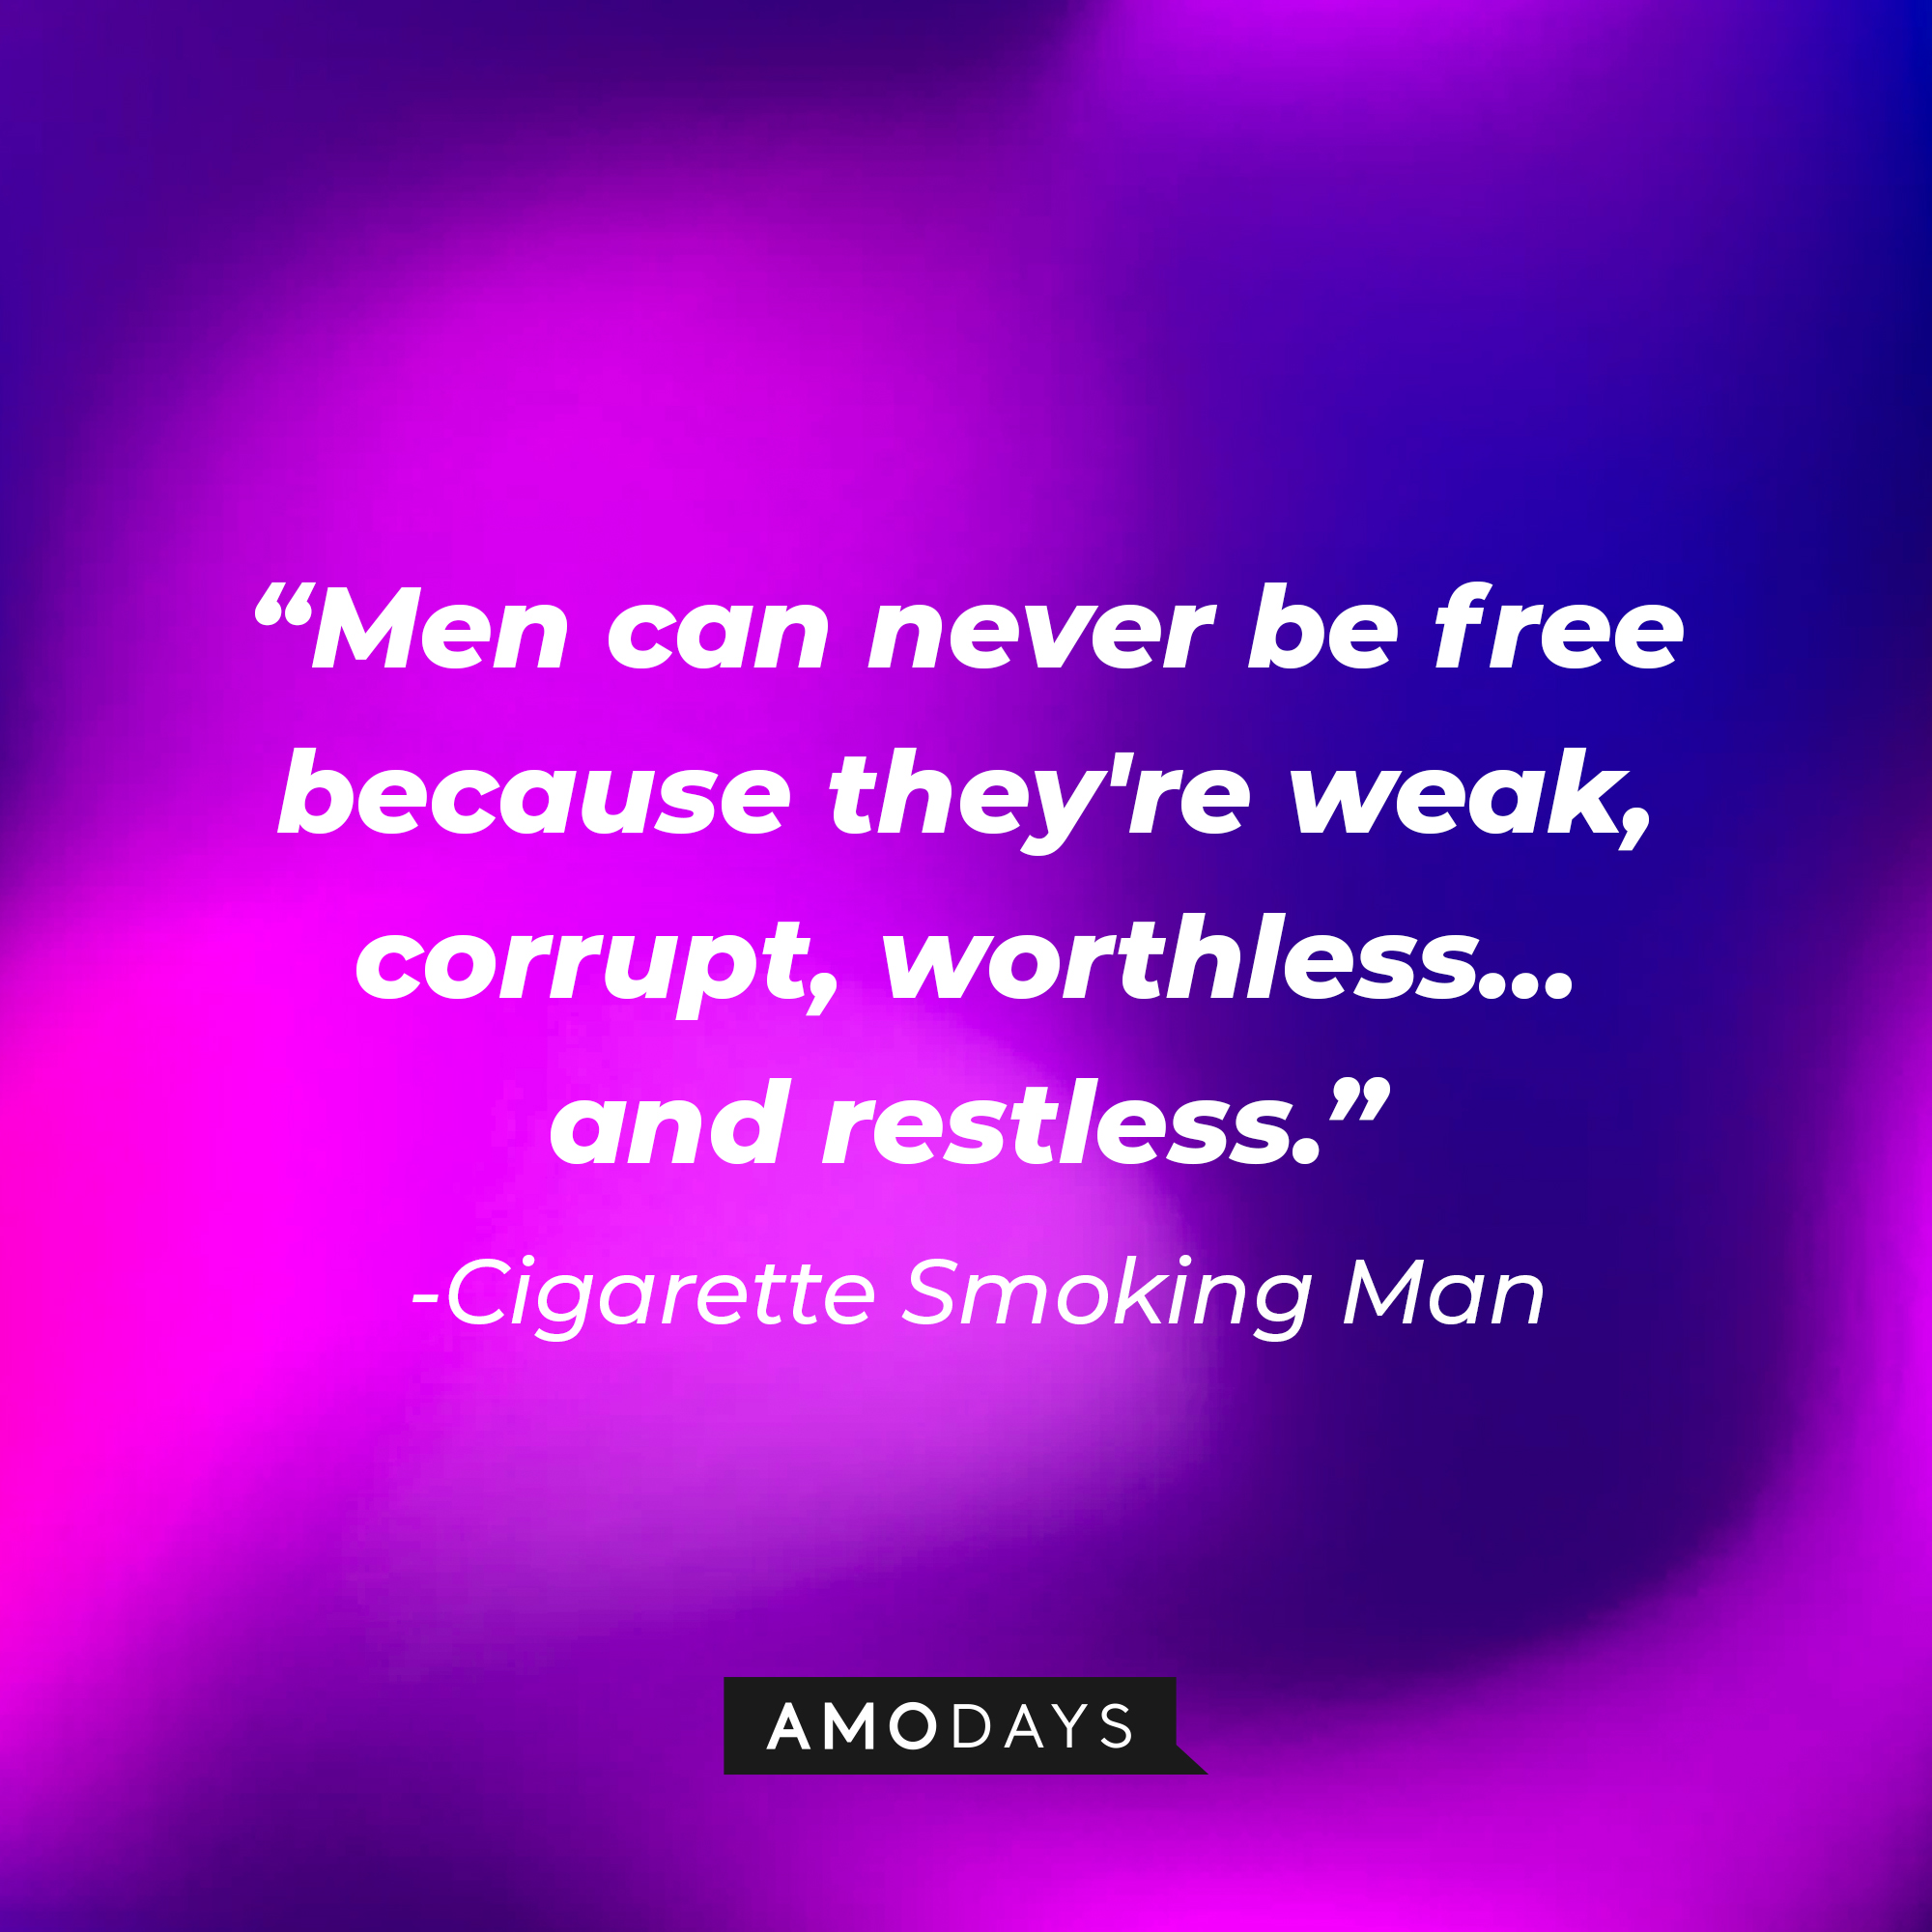 Cigarette Smoking Man's quote: "Men can never be free because they're weak, corrupt, worthless… and restless." | Source: AmoDays